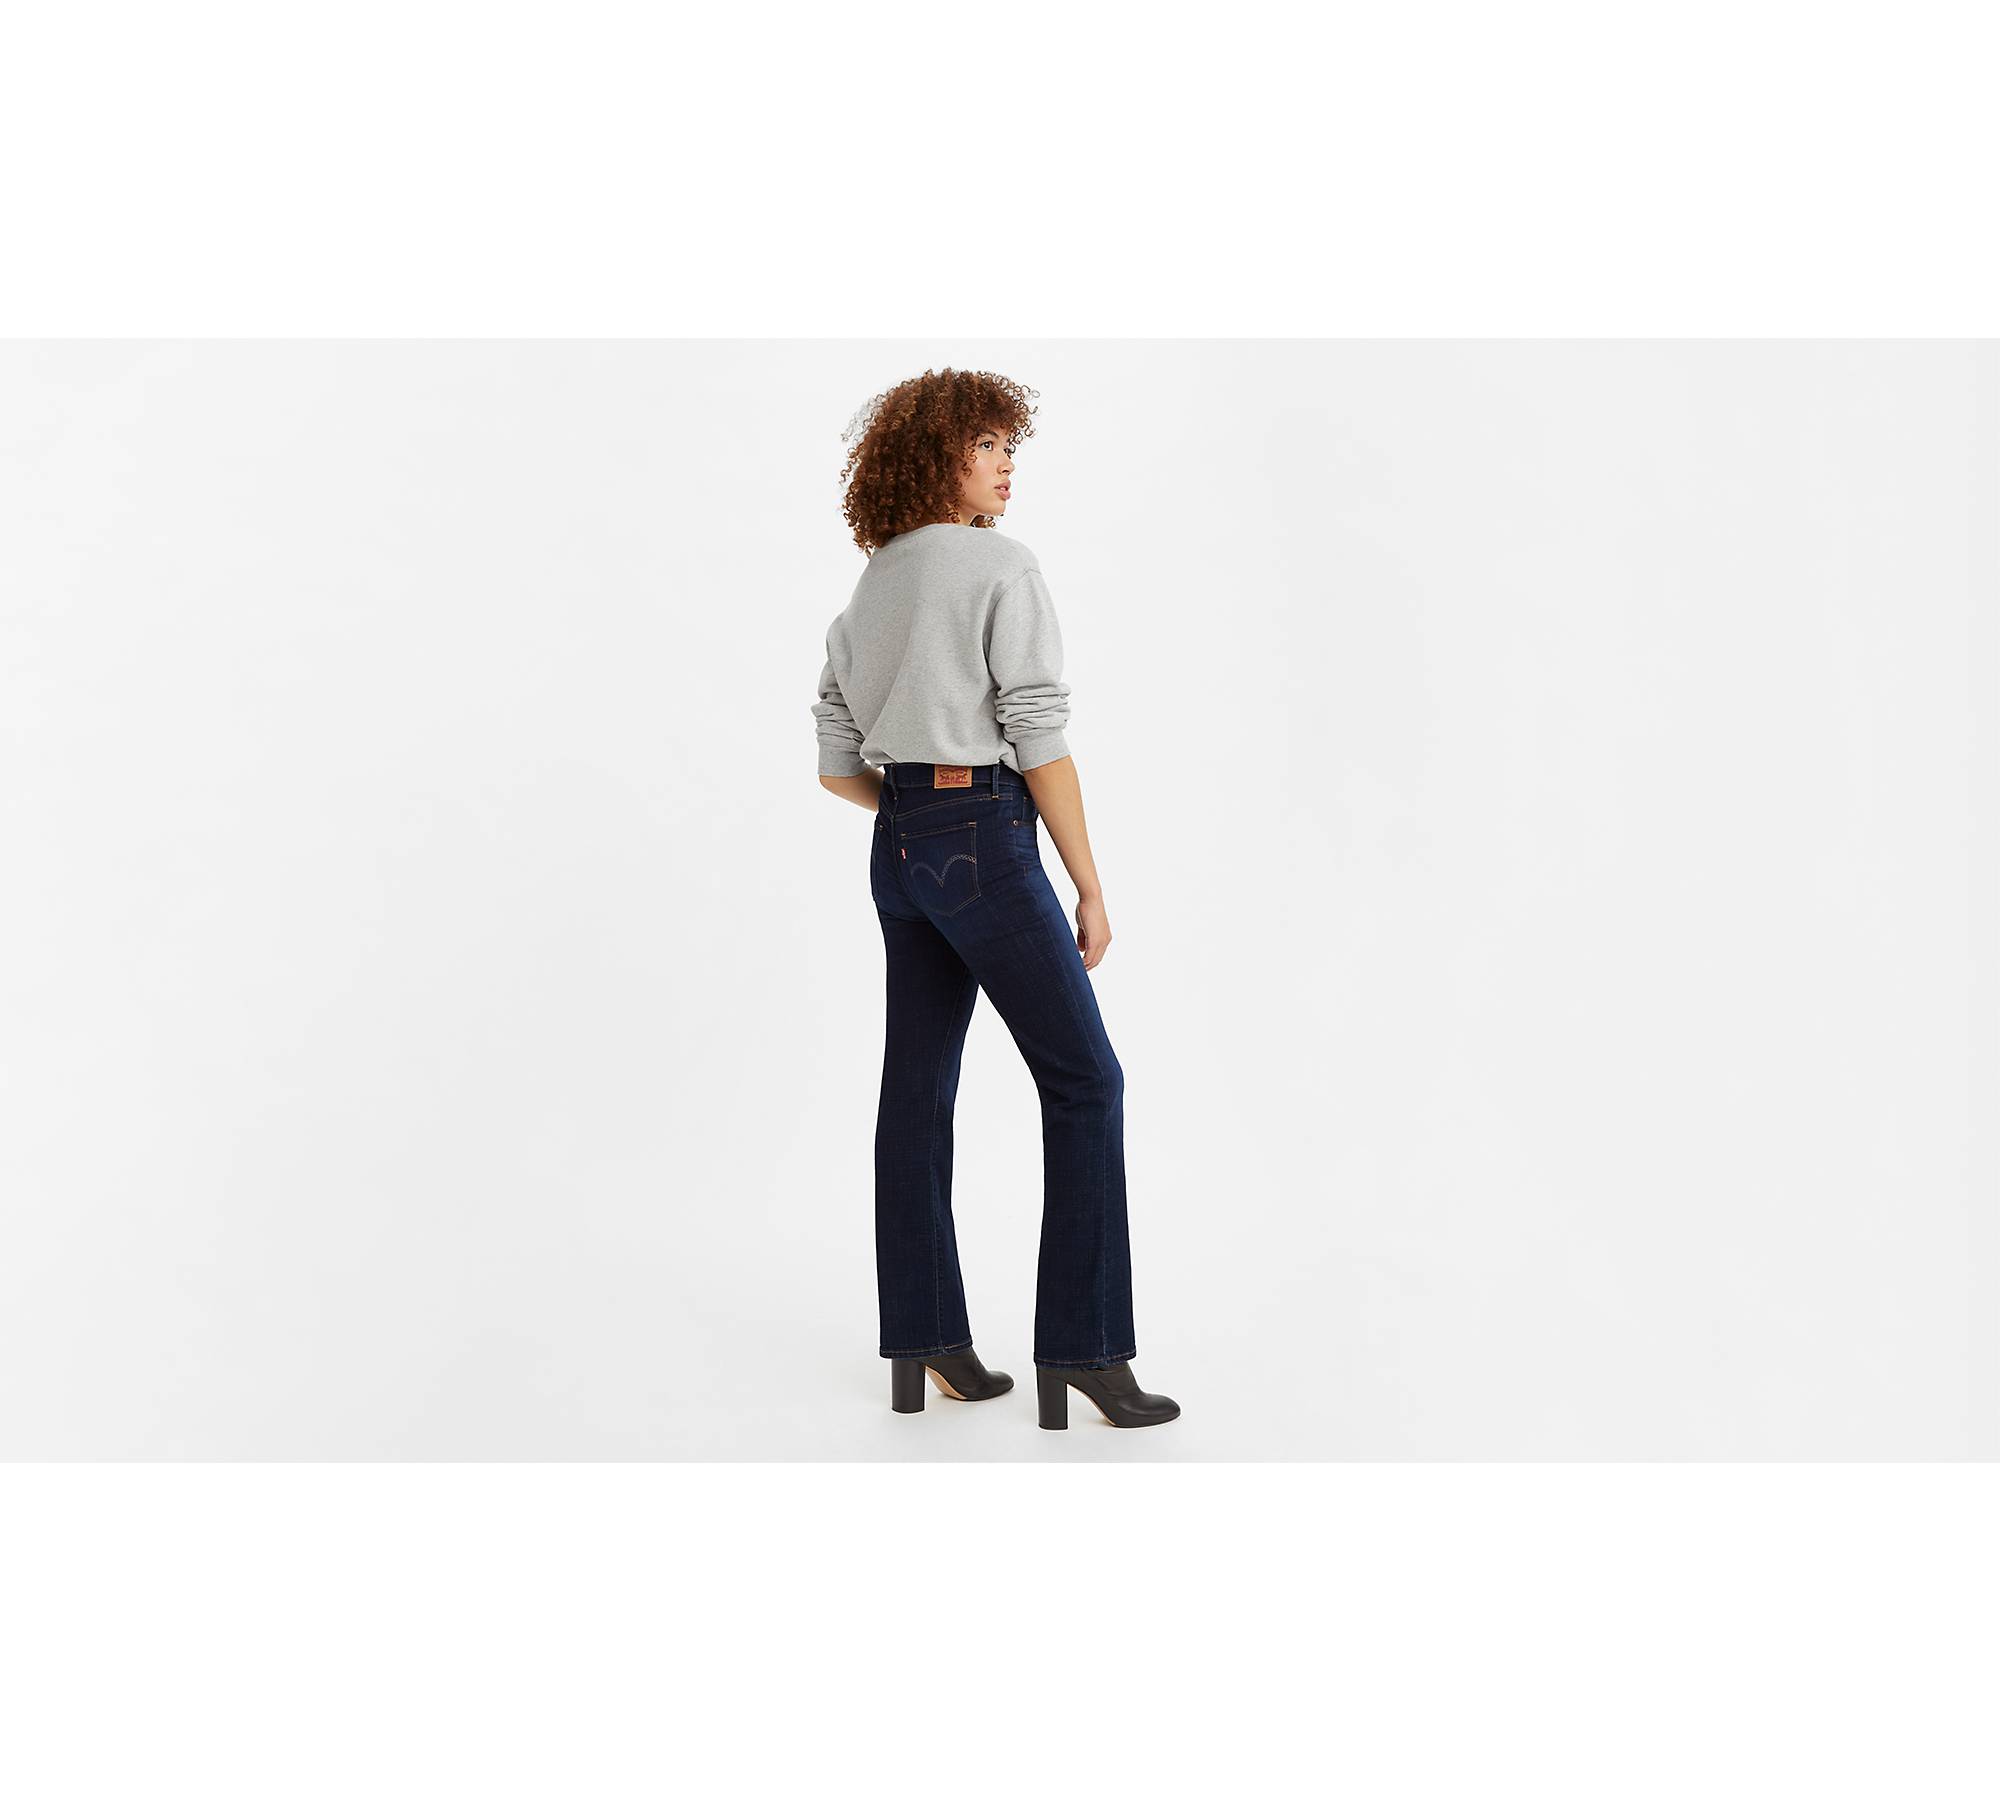  Levis Womens Classic Bootcut Jeans